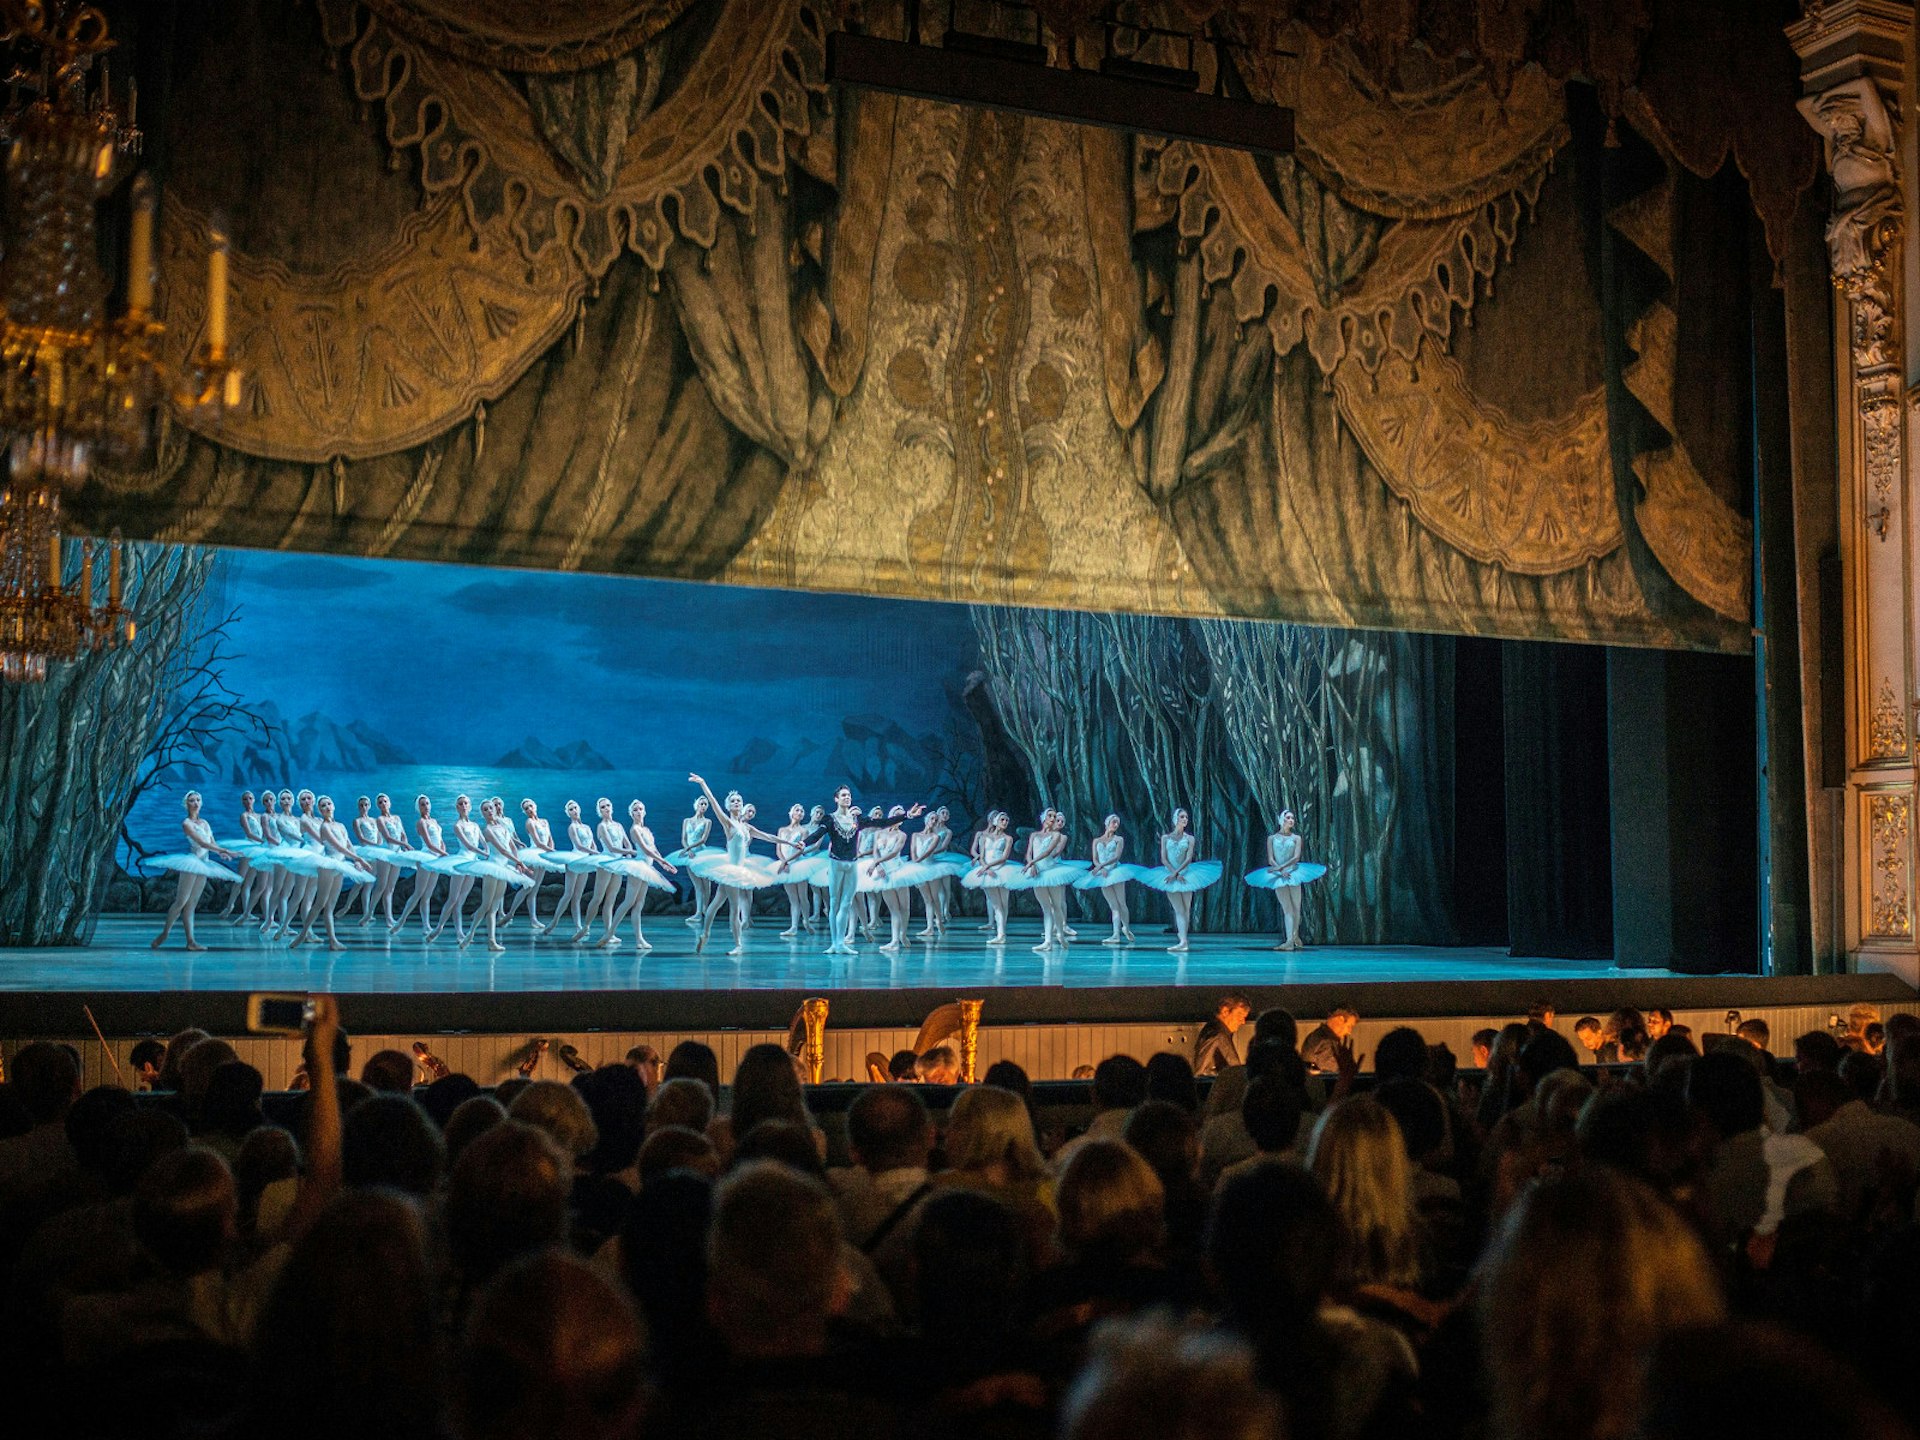 The Swan Lake ballet performance at the Mariinsky Theatre © Gary Latham / Lonely Planet